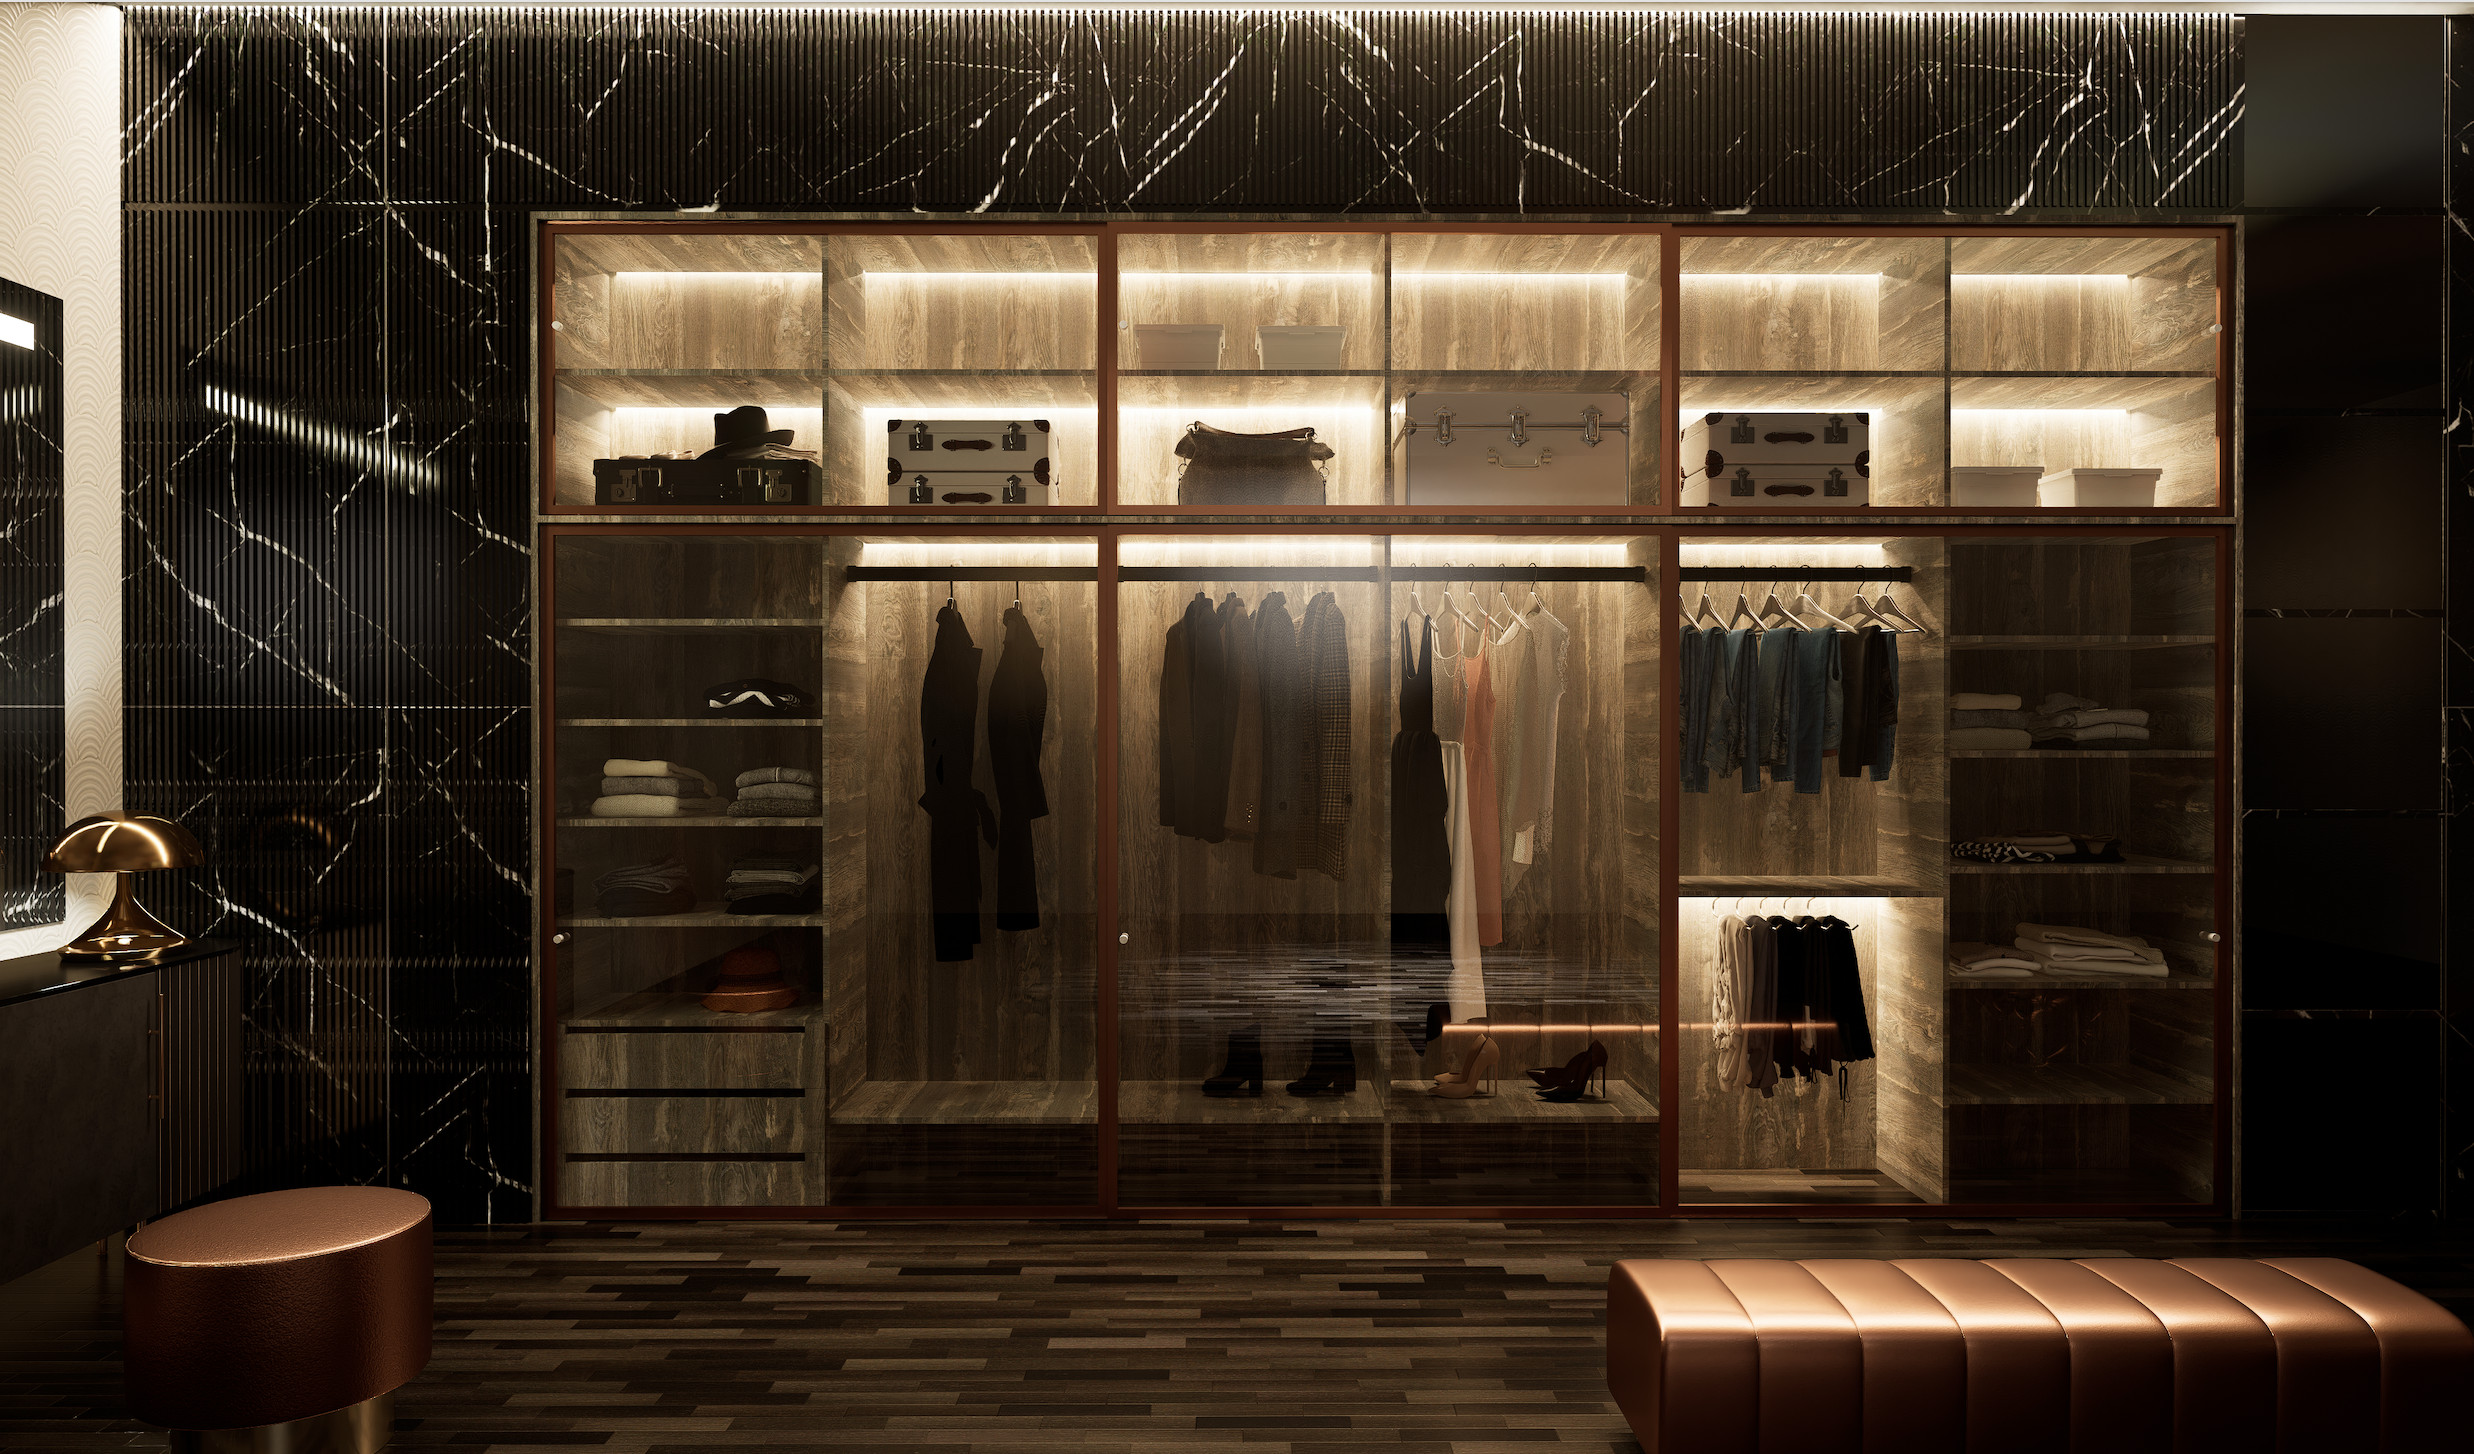 If you can imagine it, we can design & execute it for you! Our team utilizes high quality digital renderings to bring your ideas to life. Here is one of the various examples of closets that we've imag